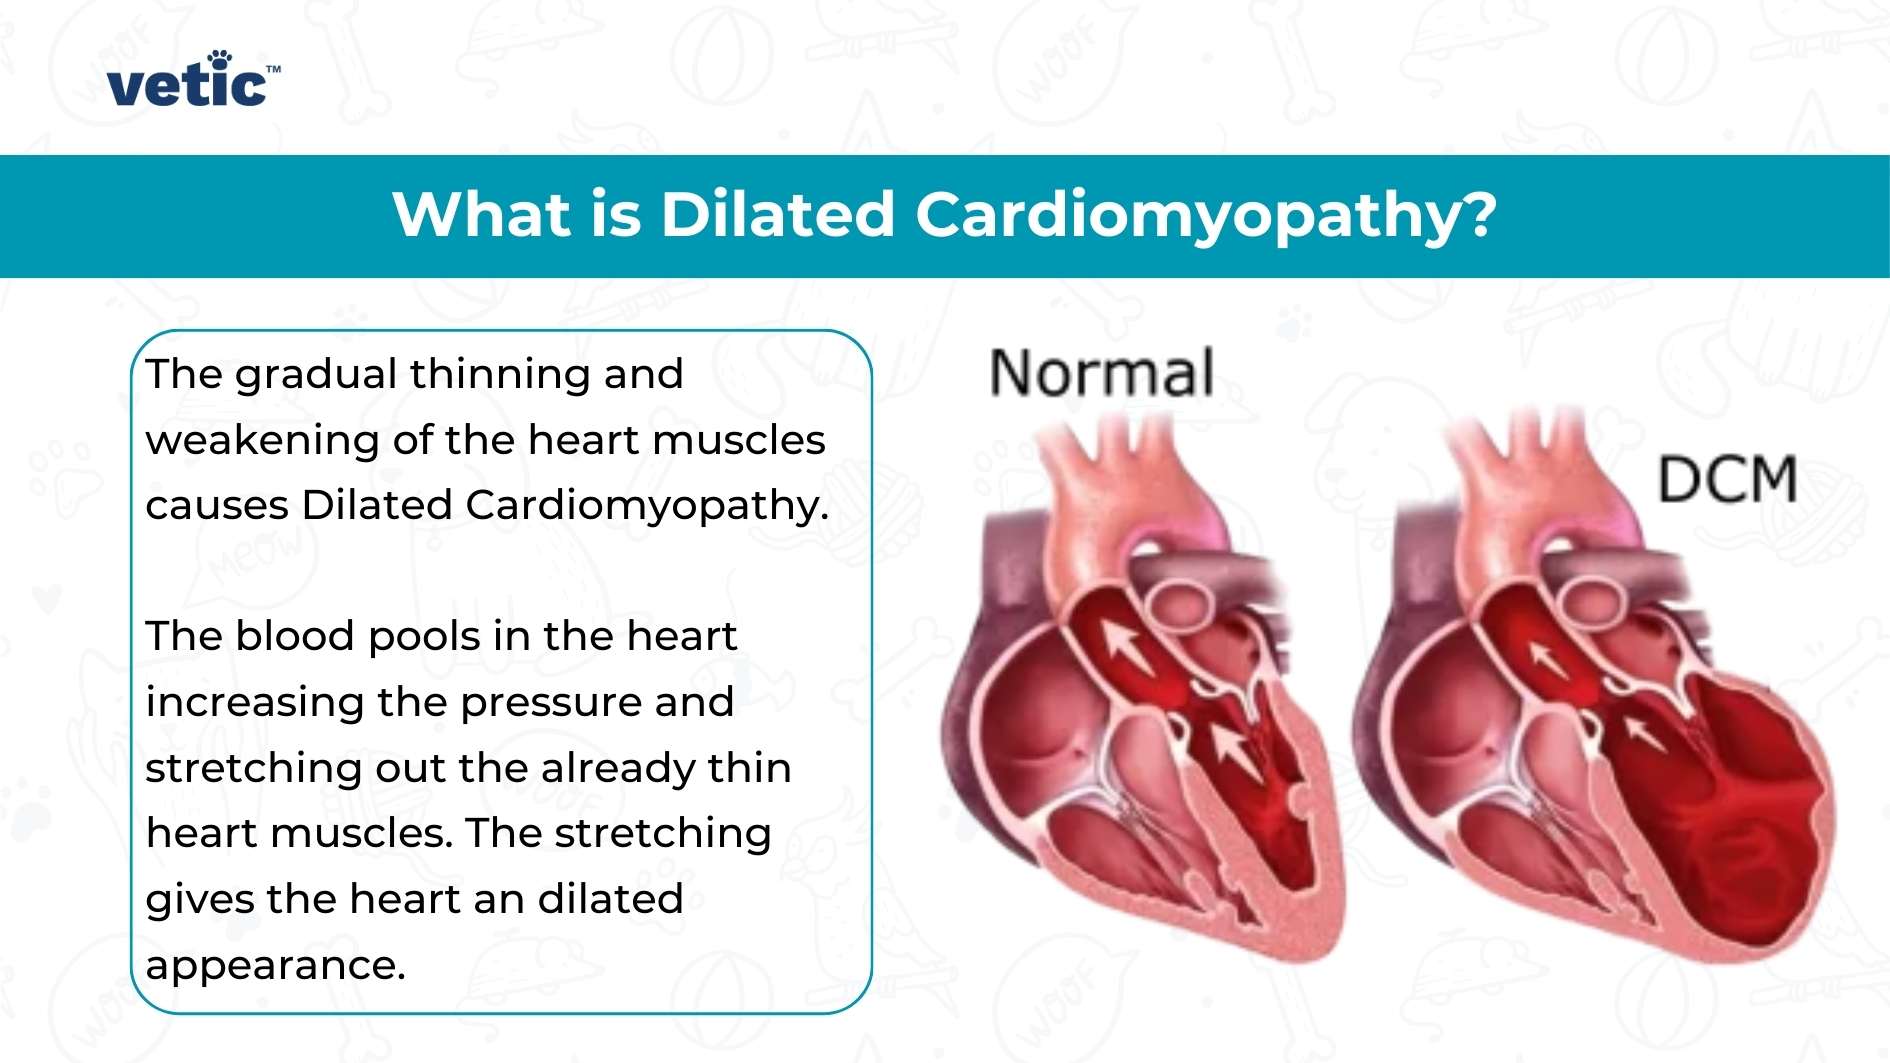 The image by vetic contains text and visual elements explaining Dilated Cardiomyopathy (DCM). The OCR text reads: “What is Dilated Cardiomyopathy? The gradual thinning and weakening of the heart muscles causes Dilated Cardiomyopathy. The blood pools in the heart increasing the pressure and stretching out the already thin heart muscles. The stretching gives the heart a dilated appearance.” It also includes labeled diagrams of a normal heart and a heart with DCM to visually represent the condition.